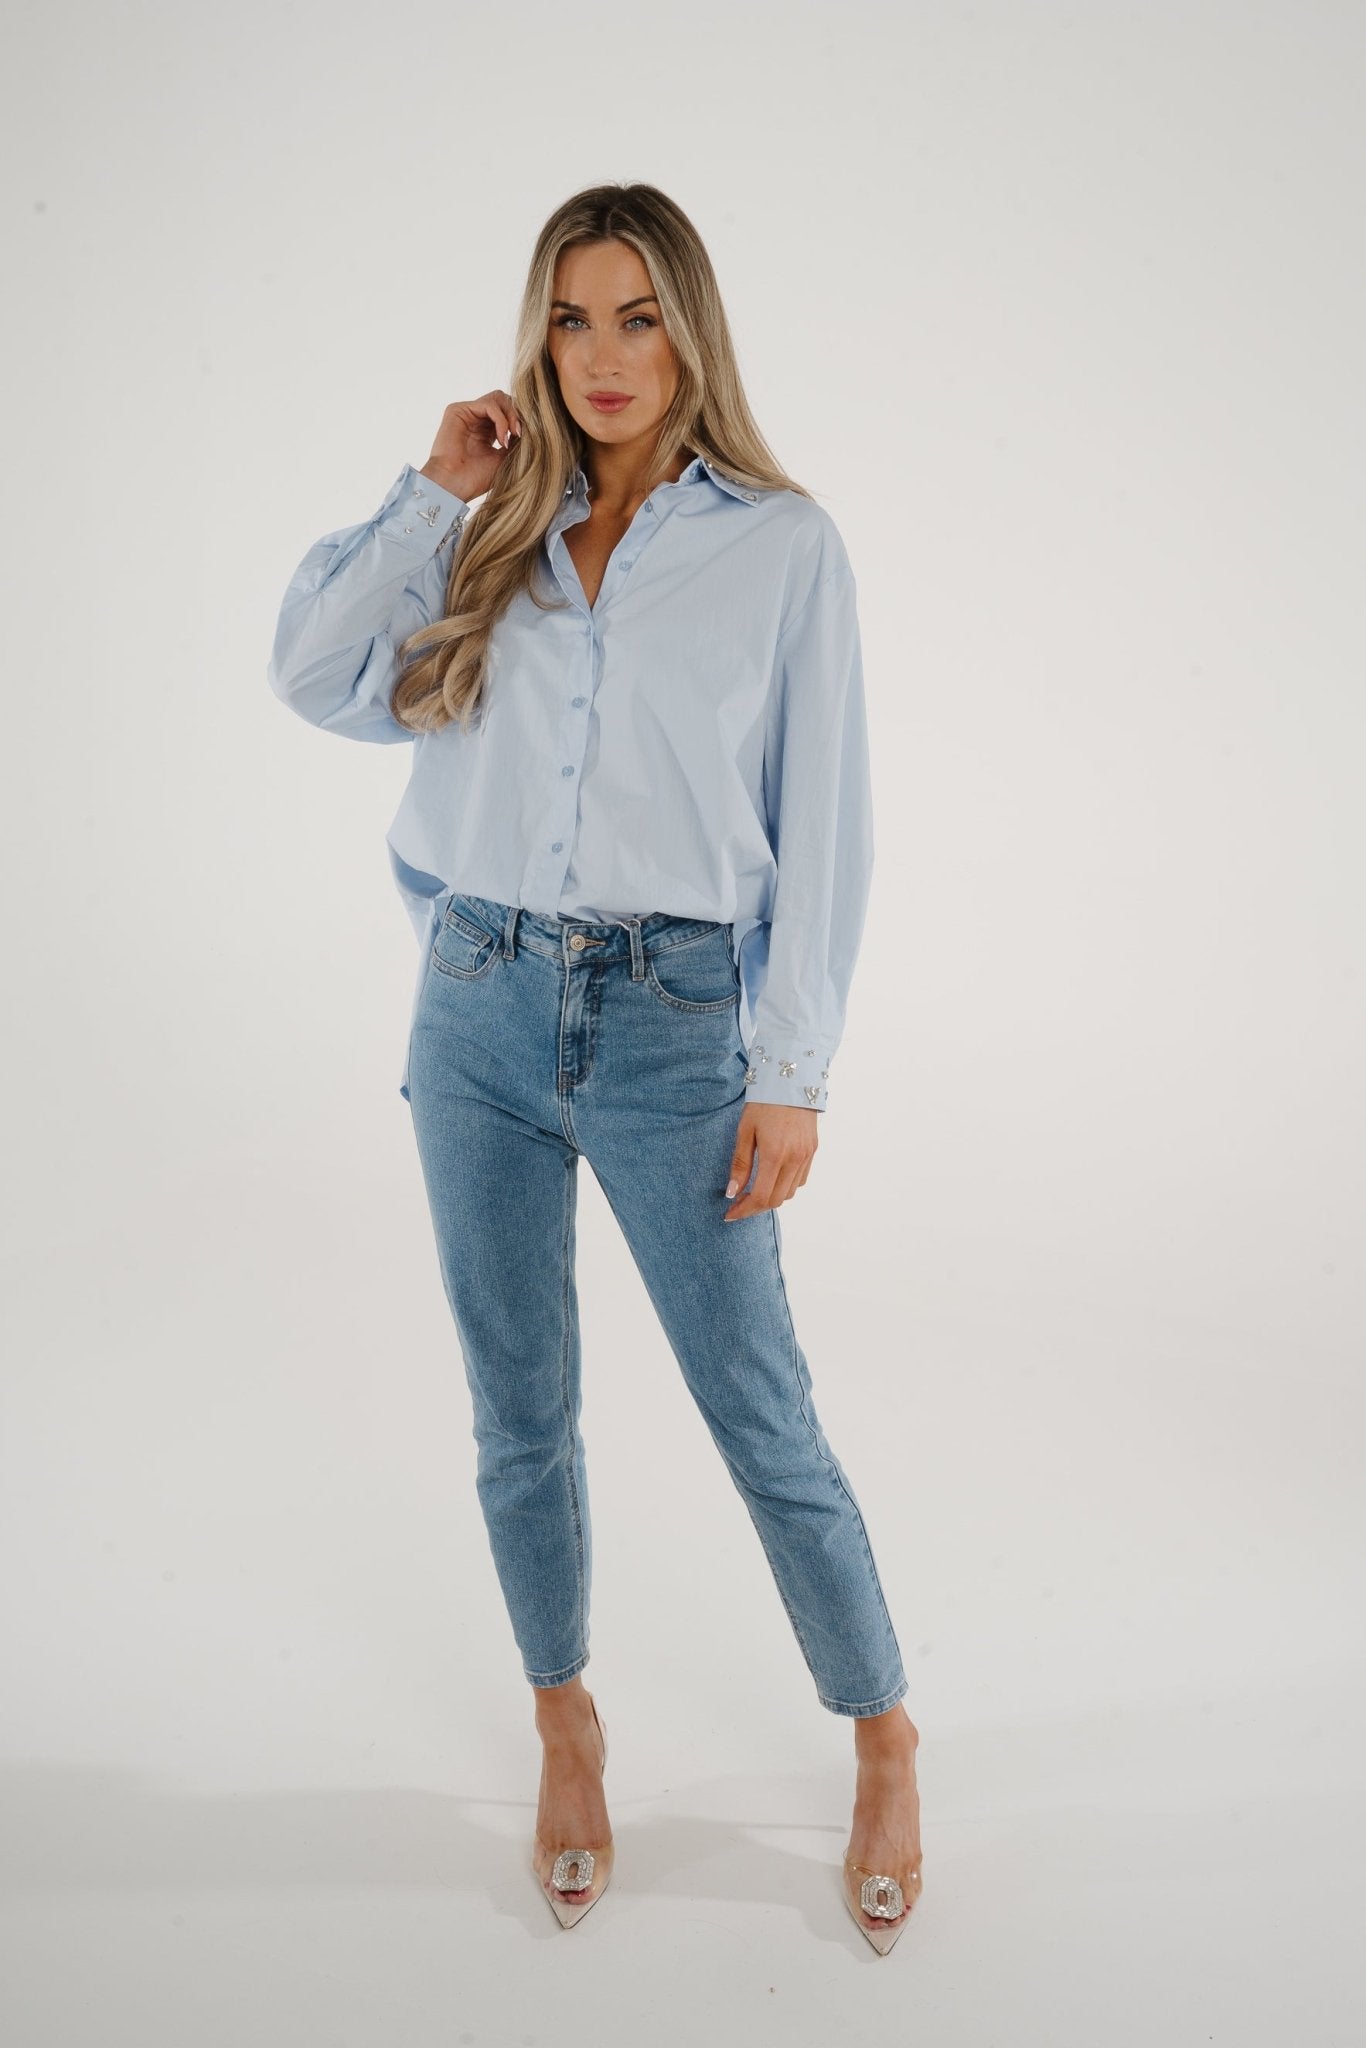 Holly Embellished Shirt In Blue - The Walk in Wardrobe